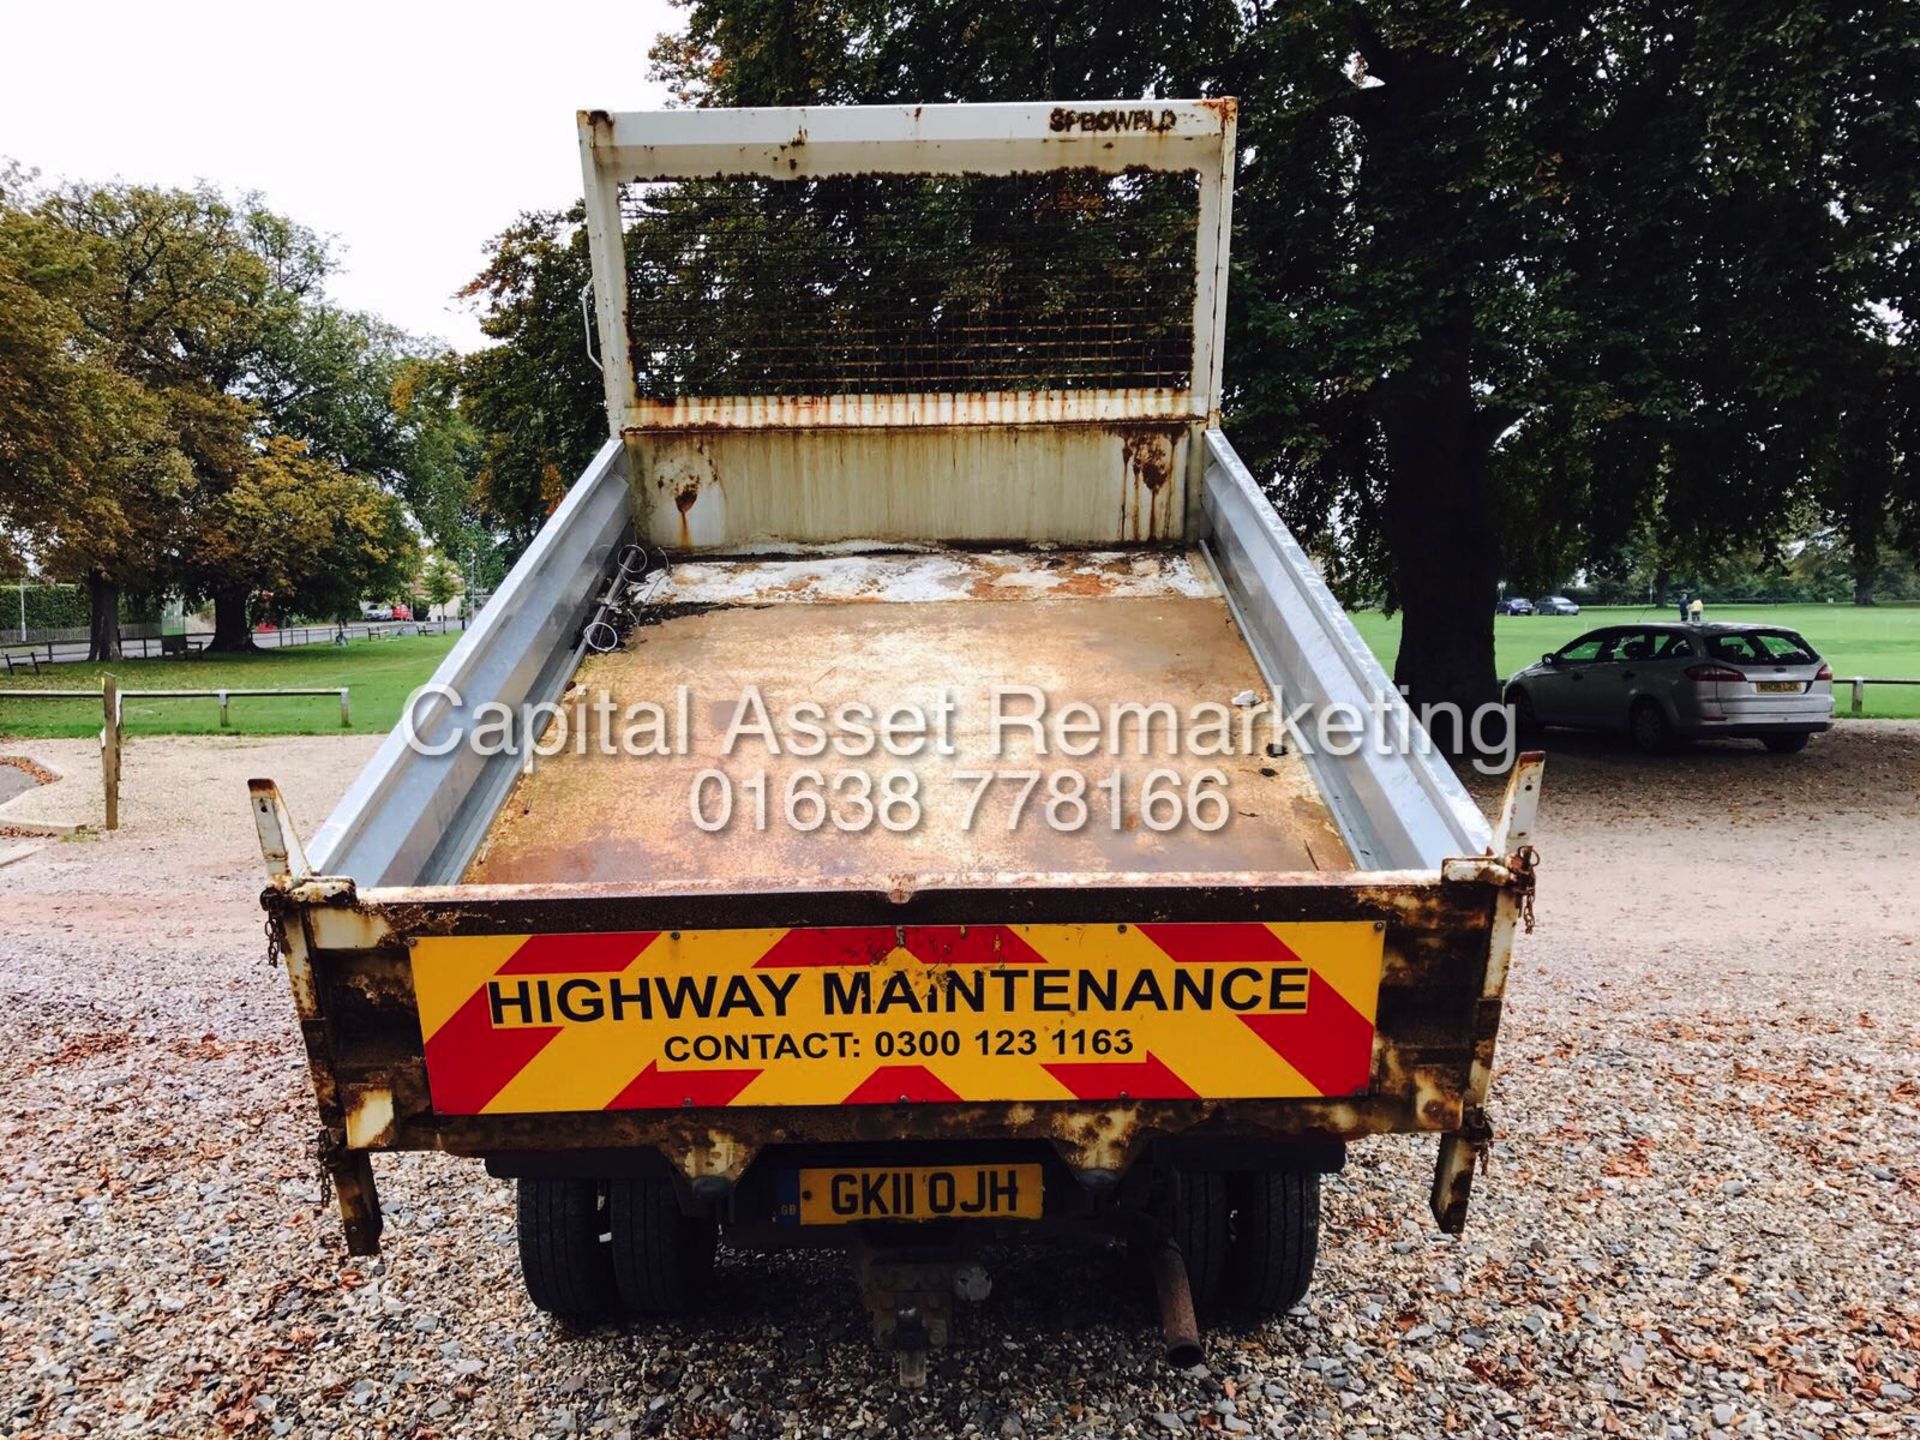 MITSUBISHI CANTER 3.0D 35C13 "130BHP-6 SPEED" TWIN WHEEL TIPPER (11 REG) 1 OWNER) - Image 4 of 15